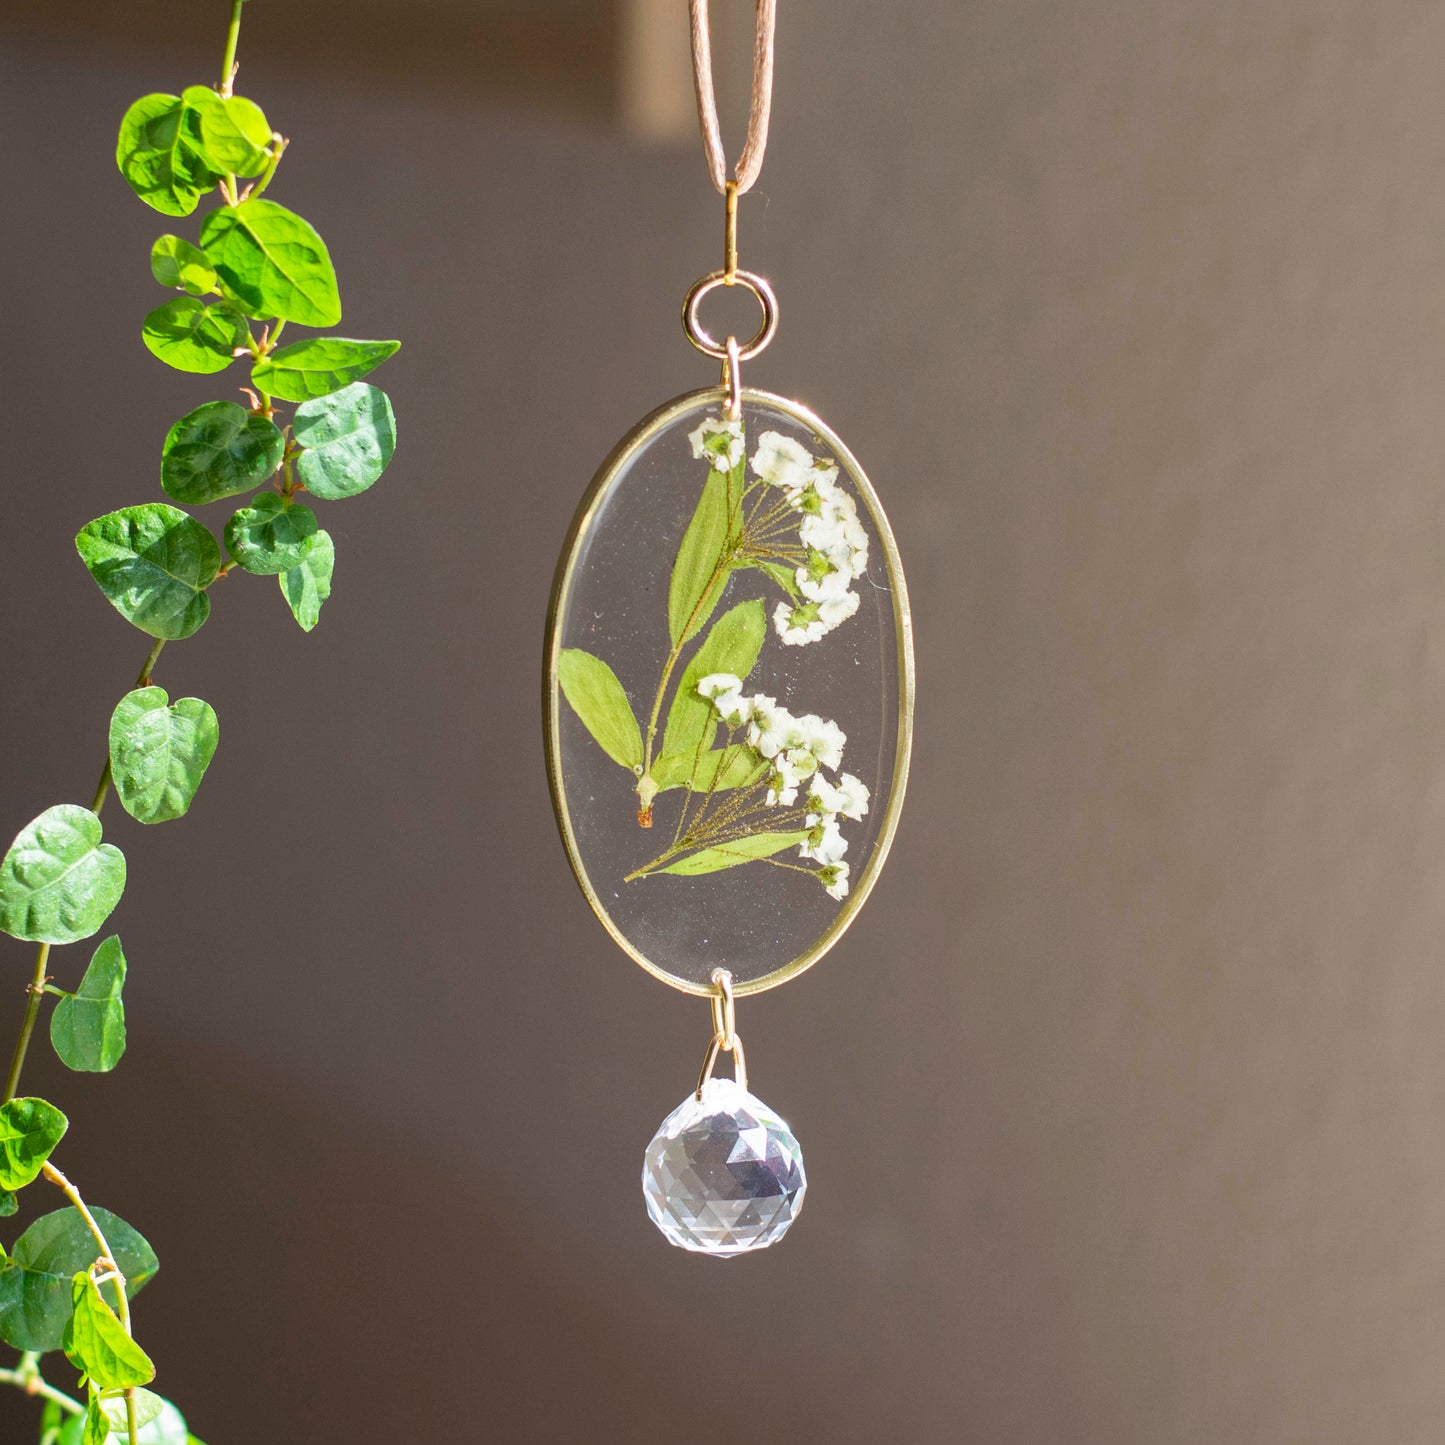 Sun Catcher - 3" Baby's Breath with Prism Bead